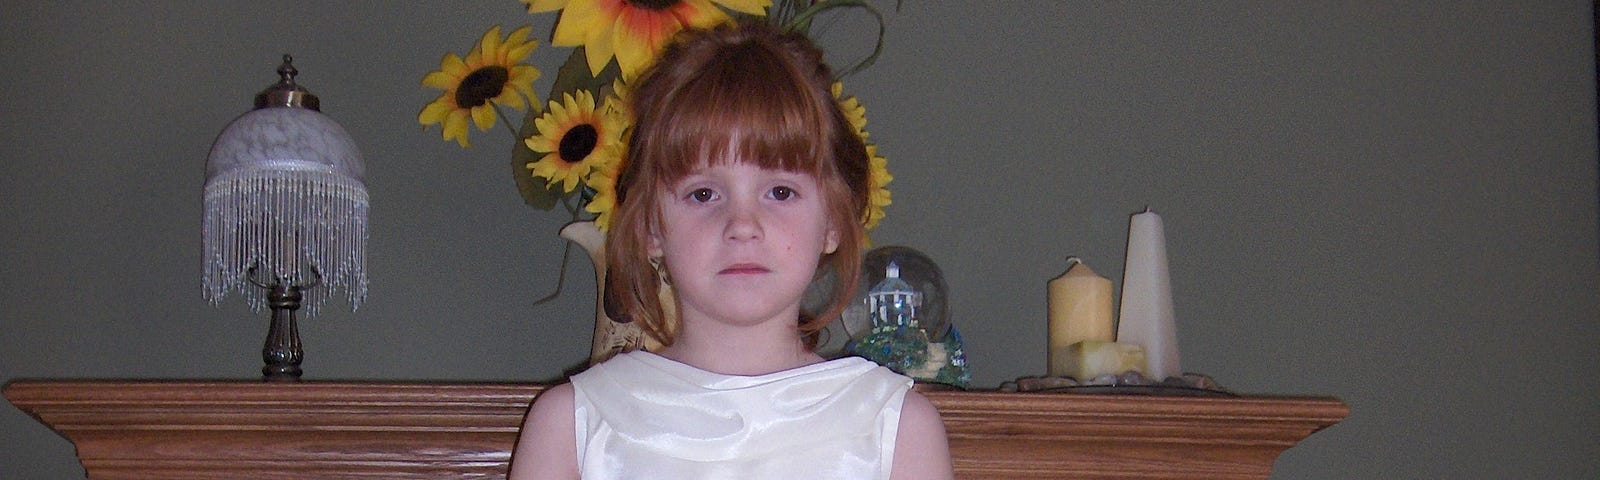 Young Fiona stands in front of a fireplace mantle in a white sleeveless dress. She is not smiling.